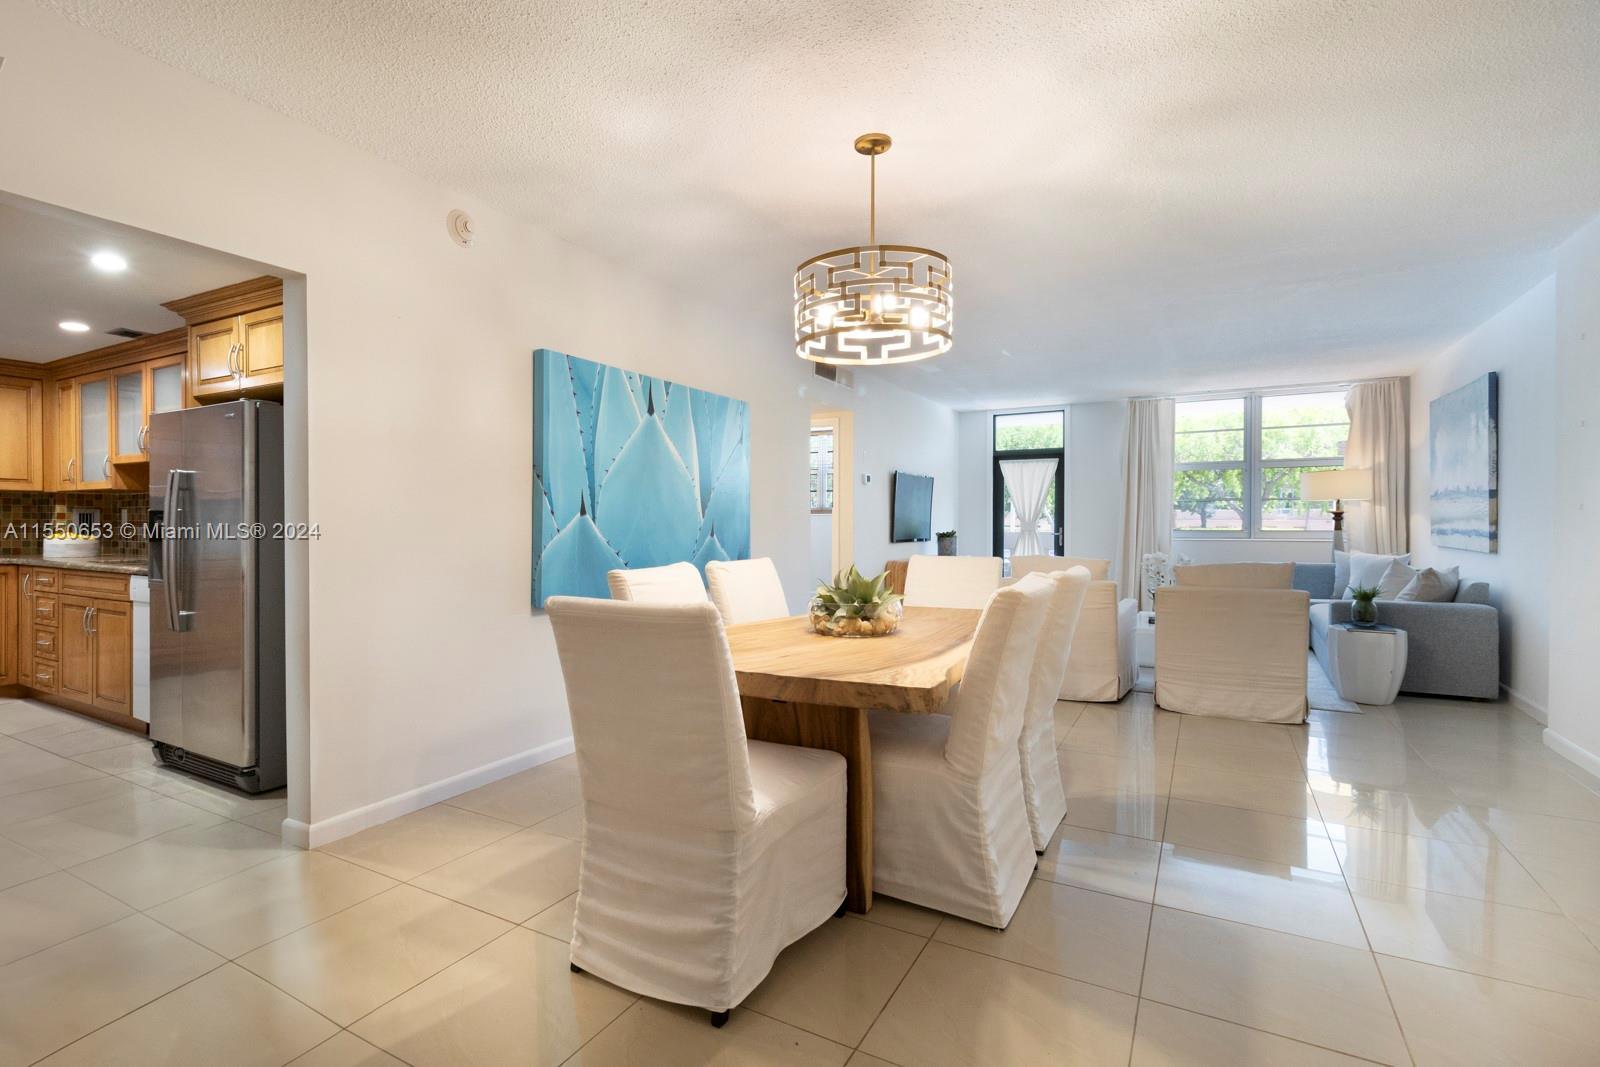 Photo of 90 Edgewater Dr #116 in Coral Gables, FL